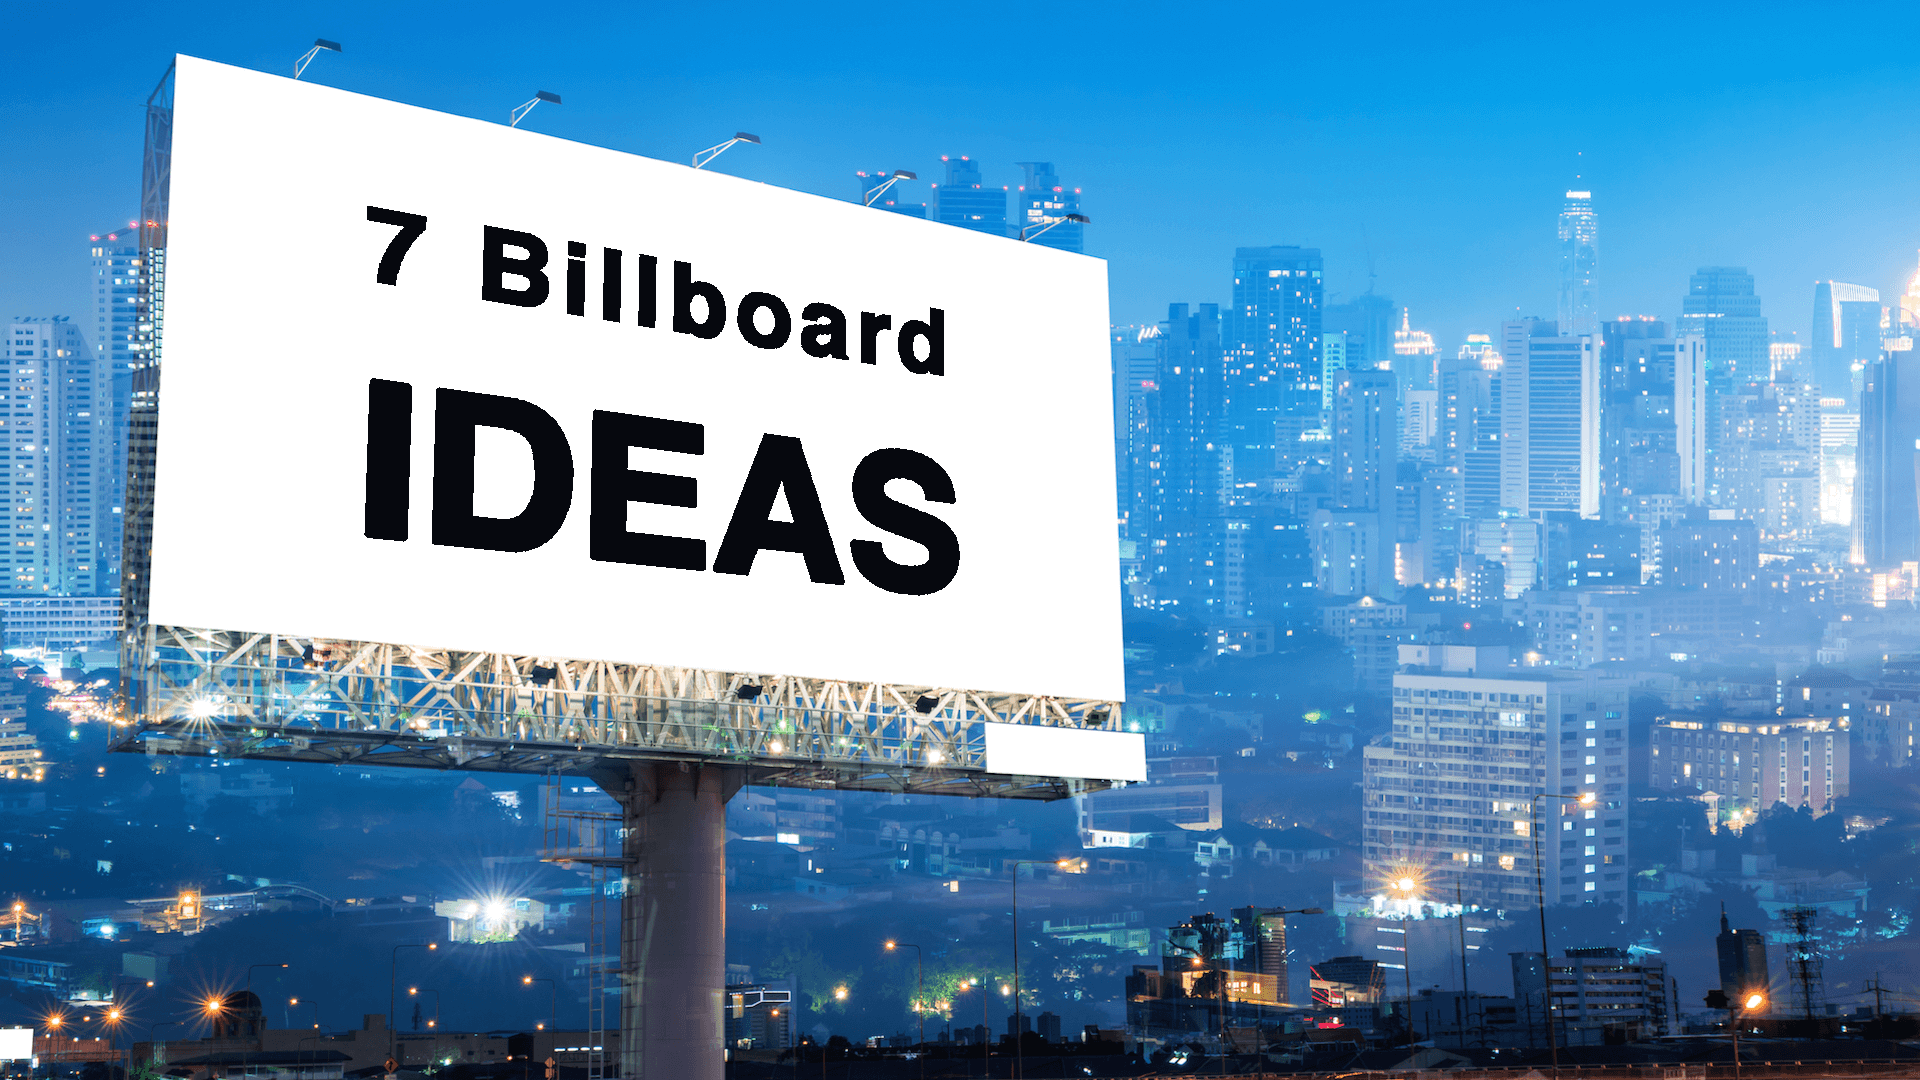 7 Awesome Billboard Ad Examples For Real Estate - Facebook ...